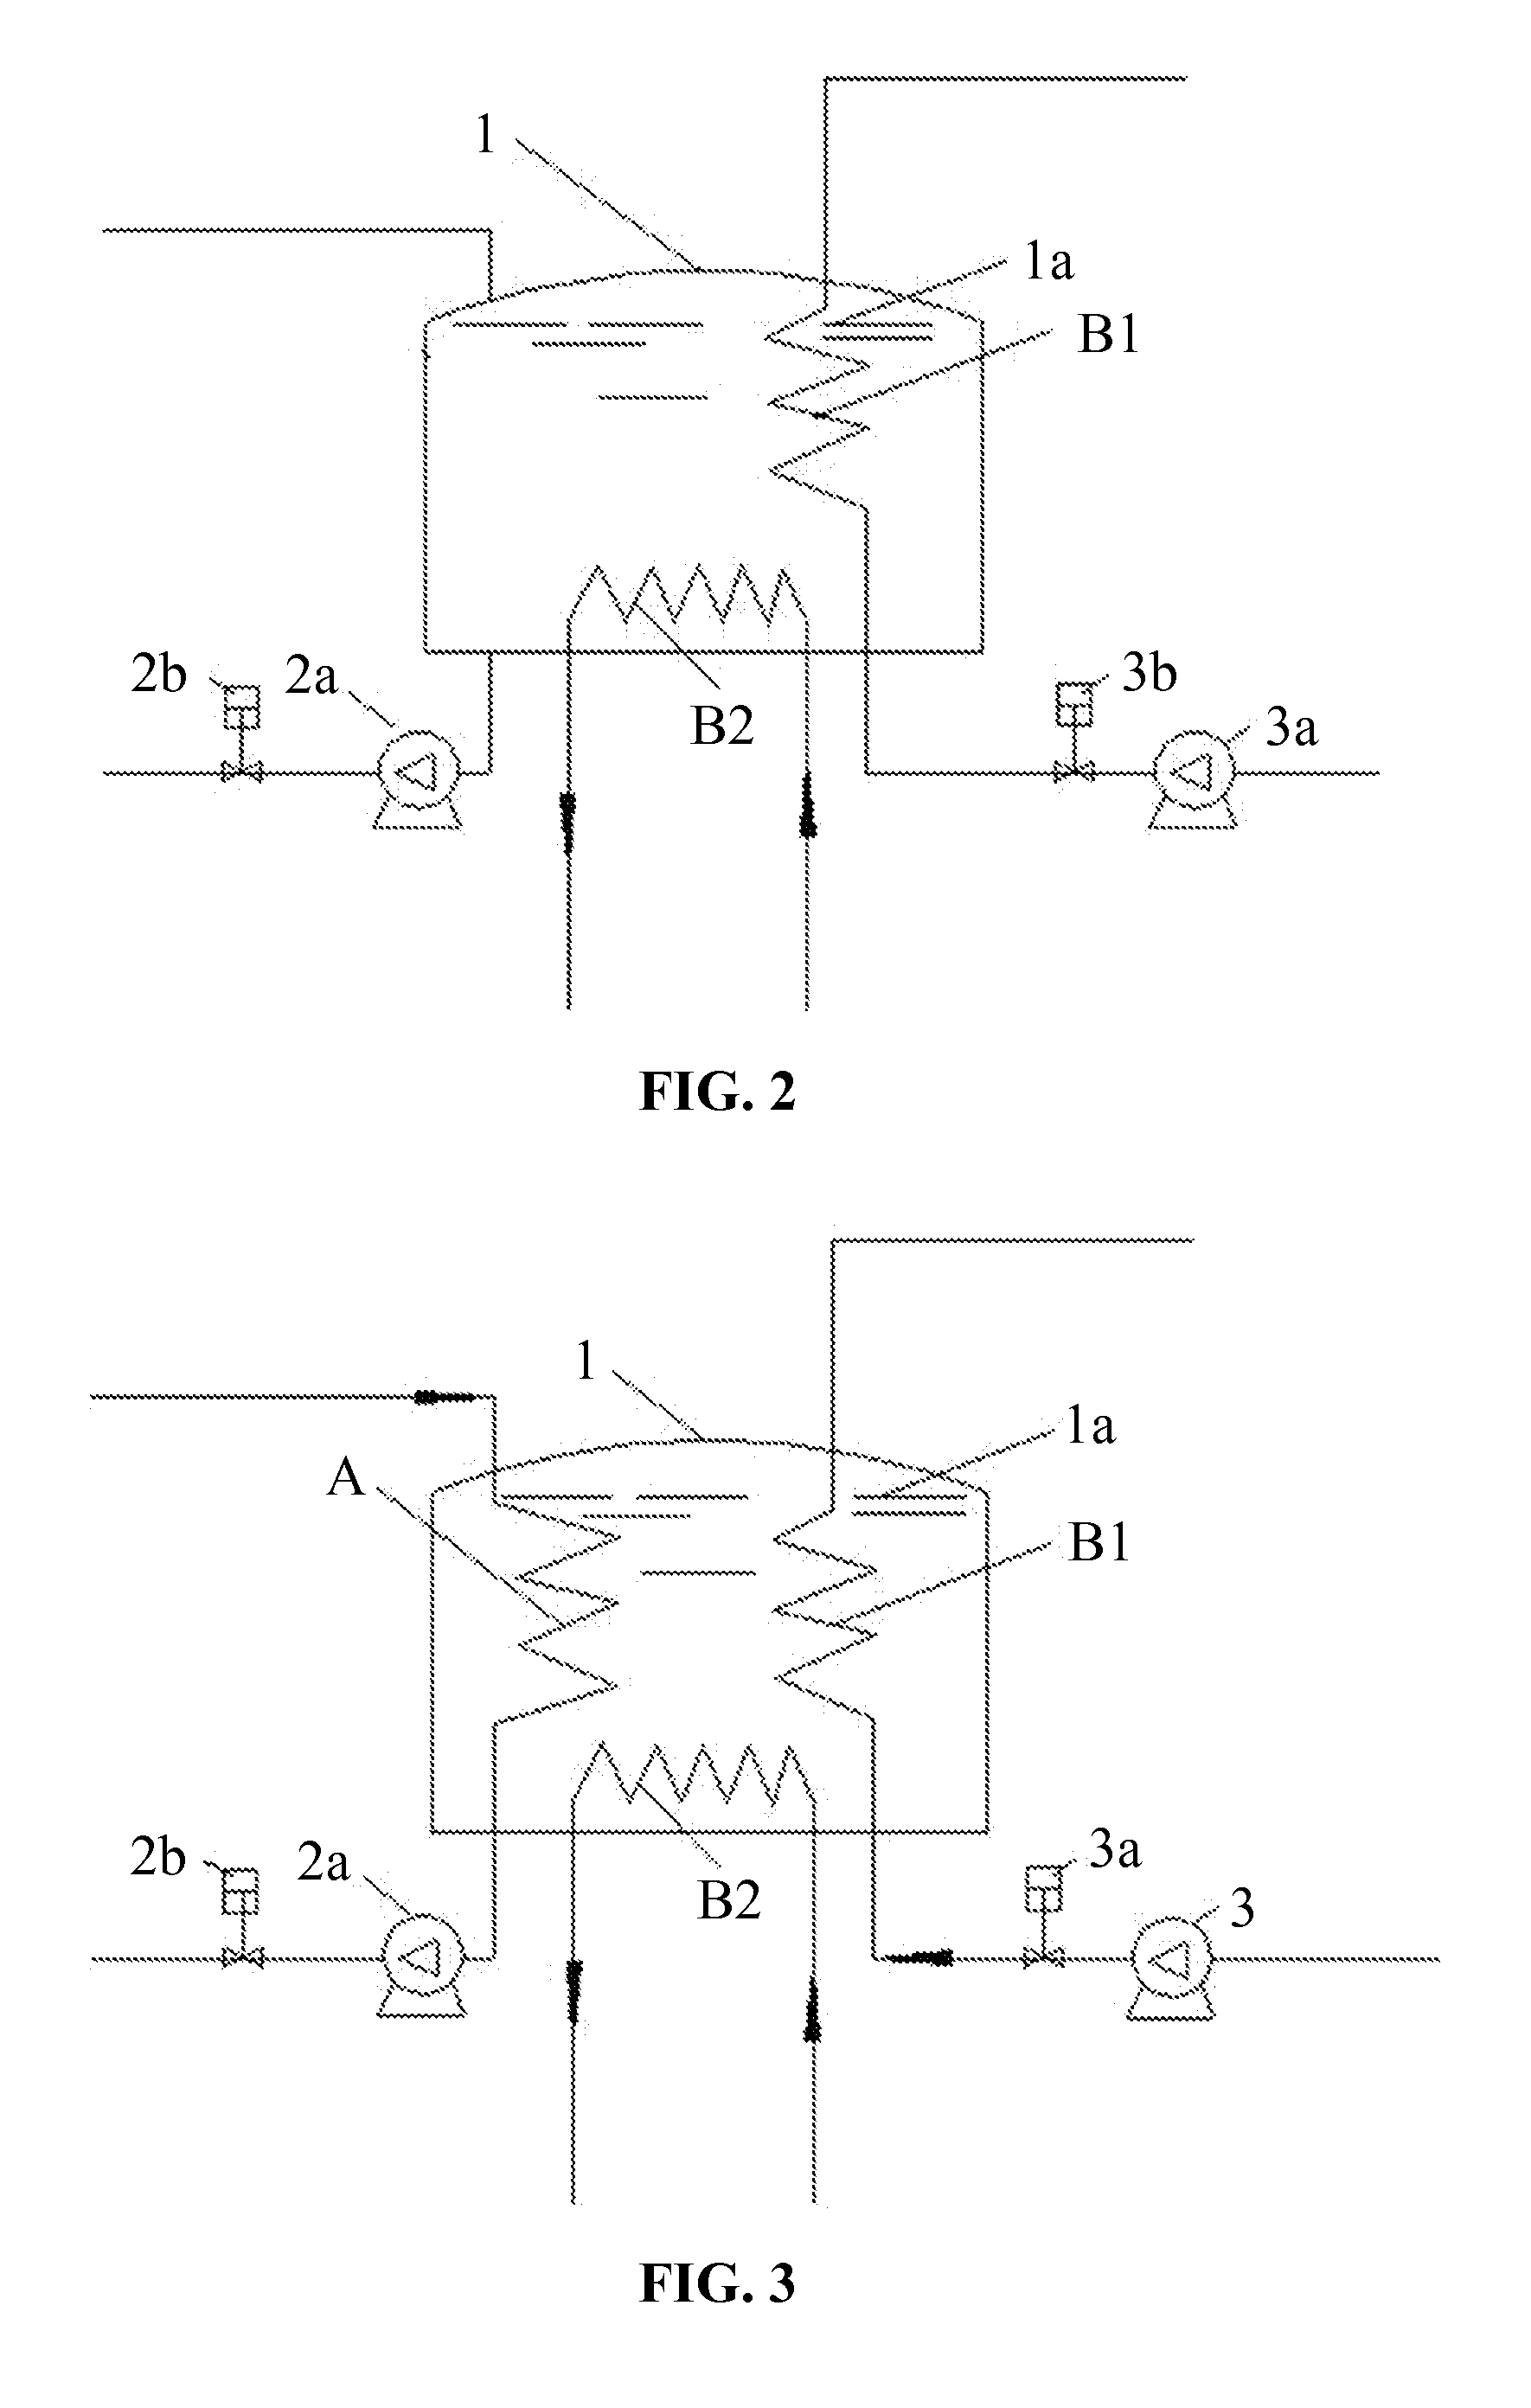 Solar-biomass complementary thermal energy supply system